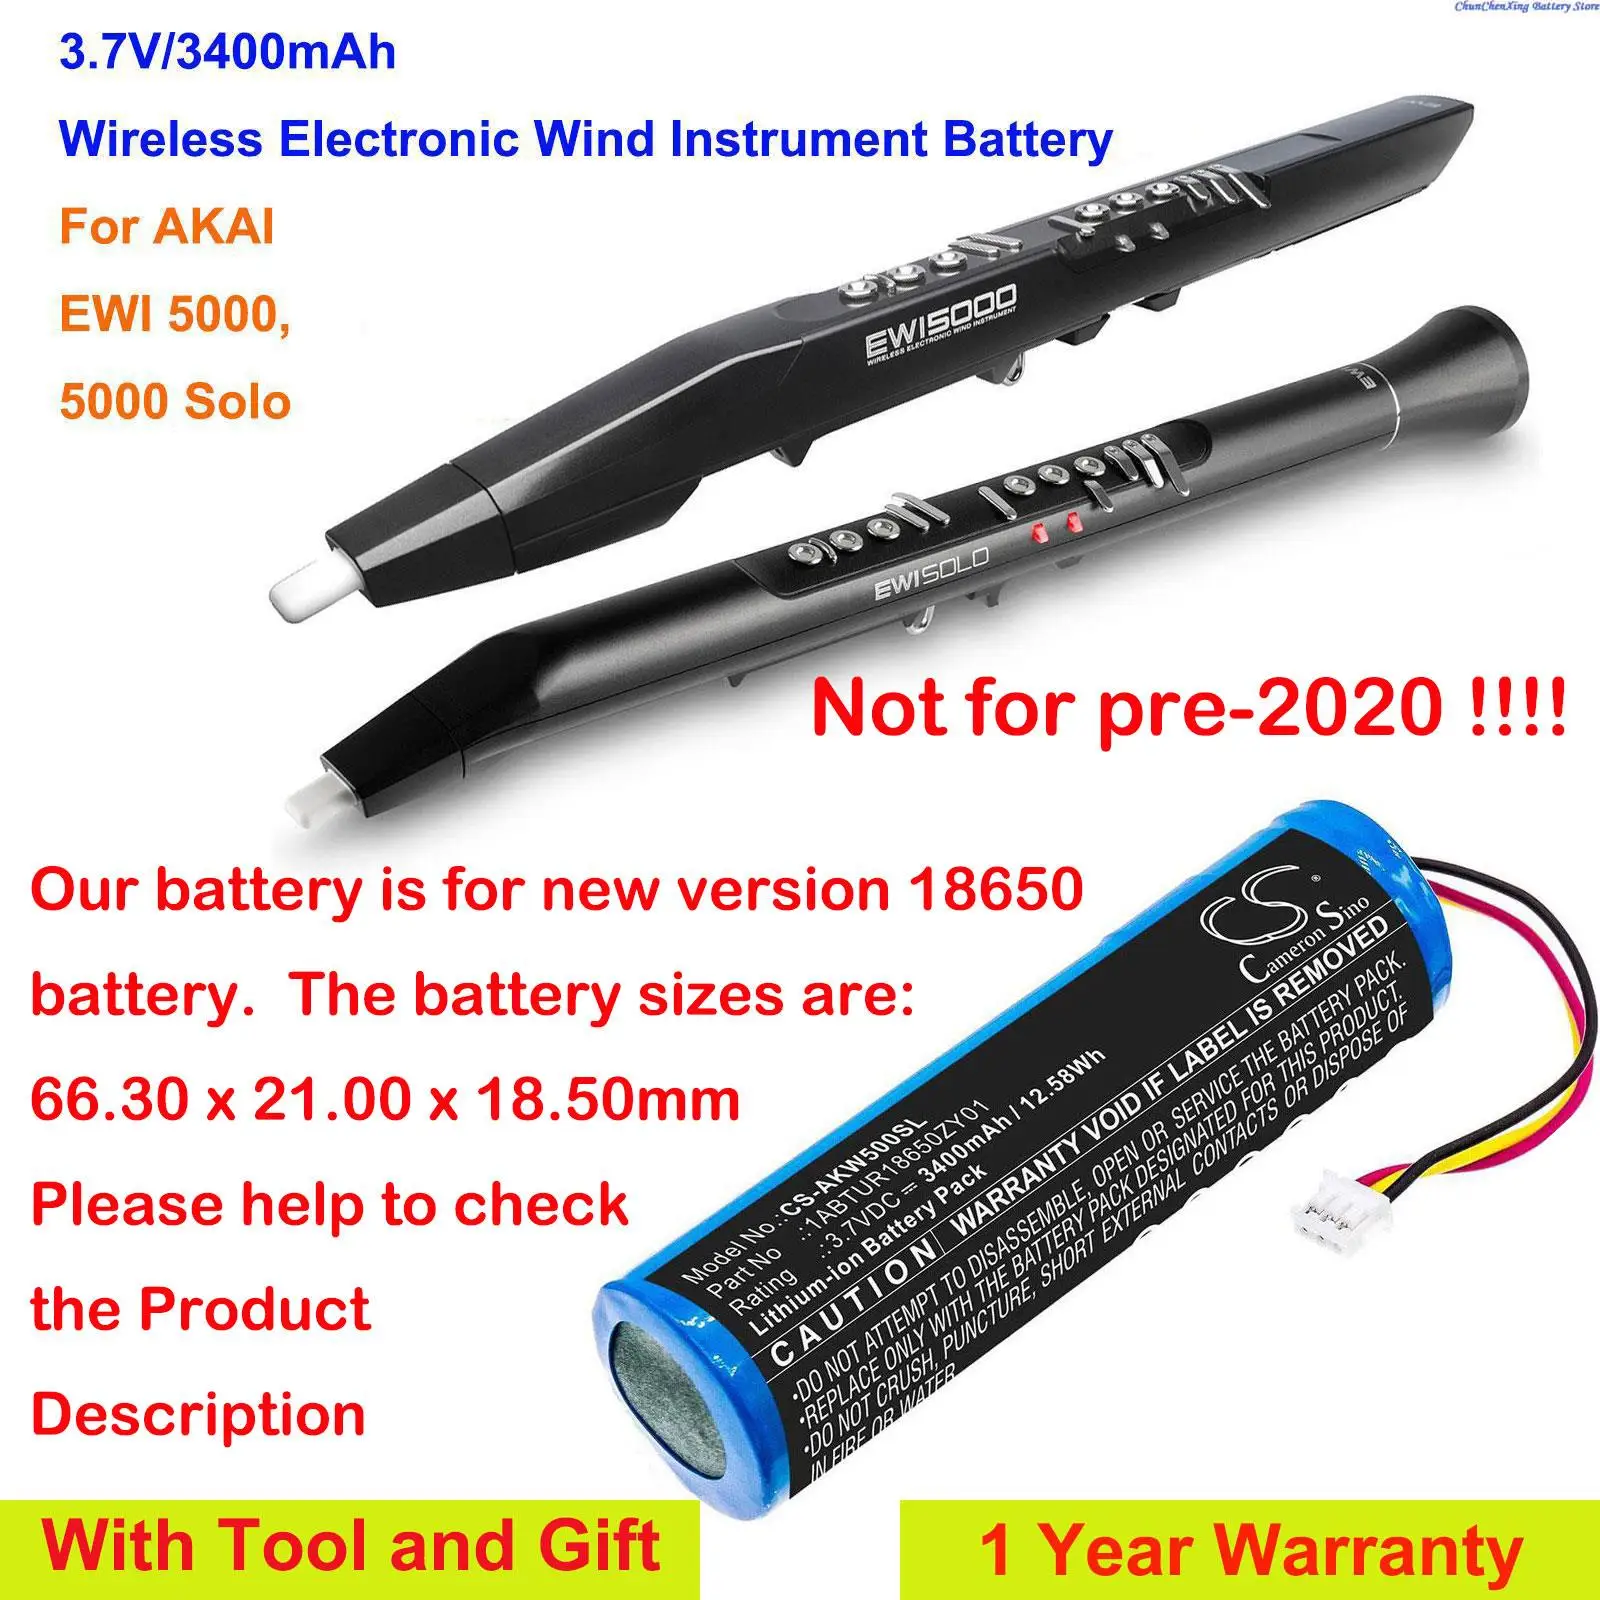 

3400mAh Electronic Wind Instrument Battery For AKAI 5000 Solo, EWI 5000, please check the sizes of the battery!!!!